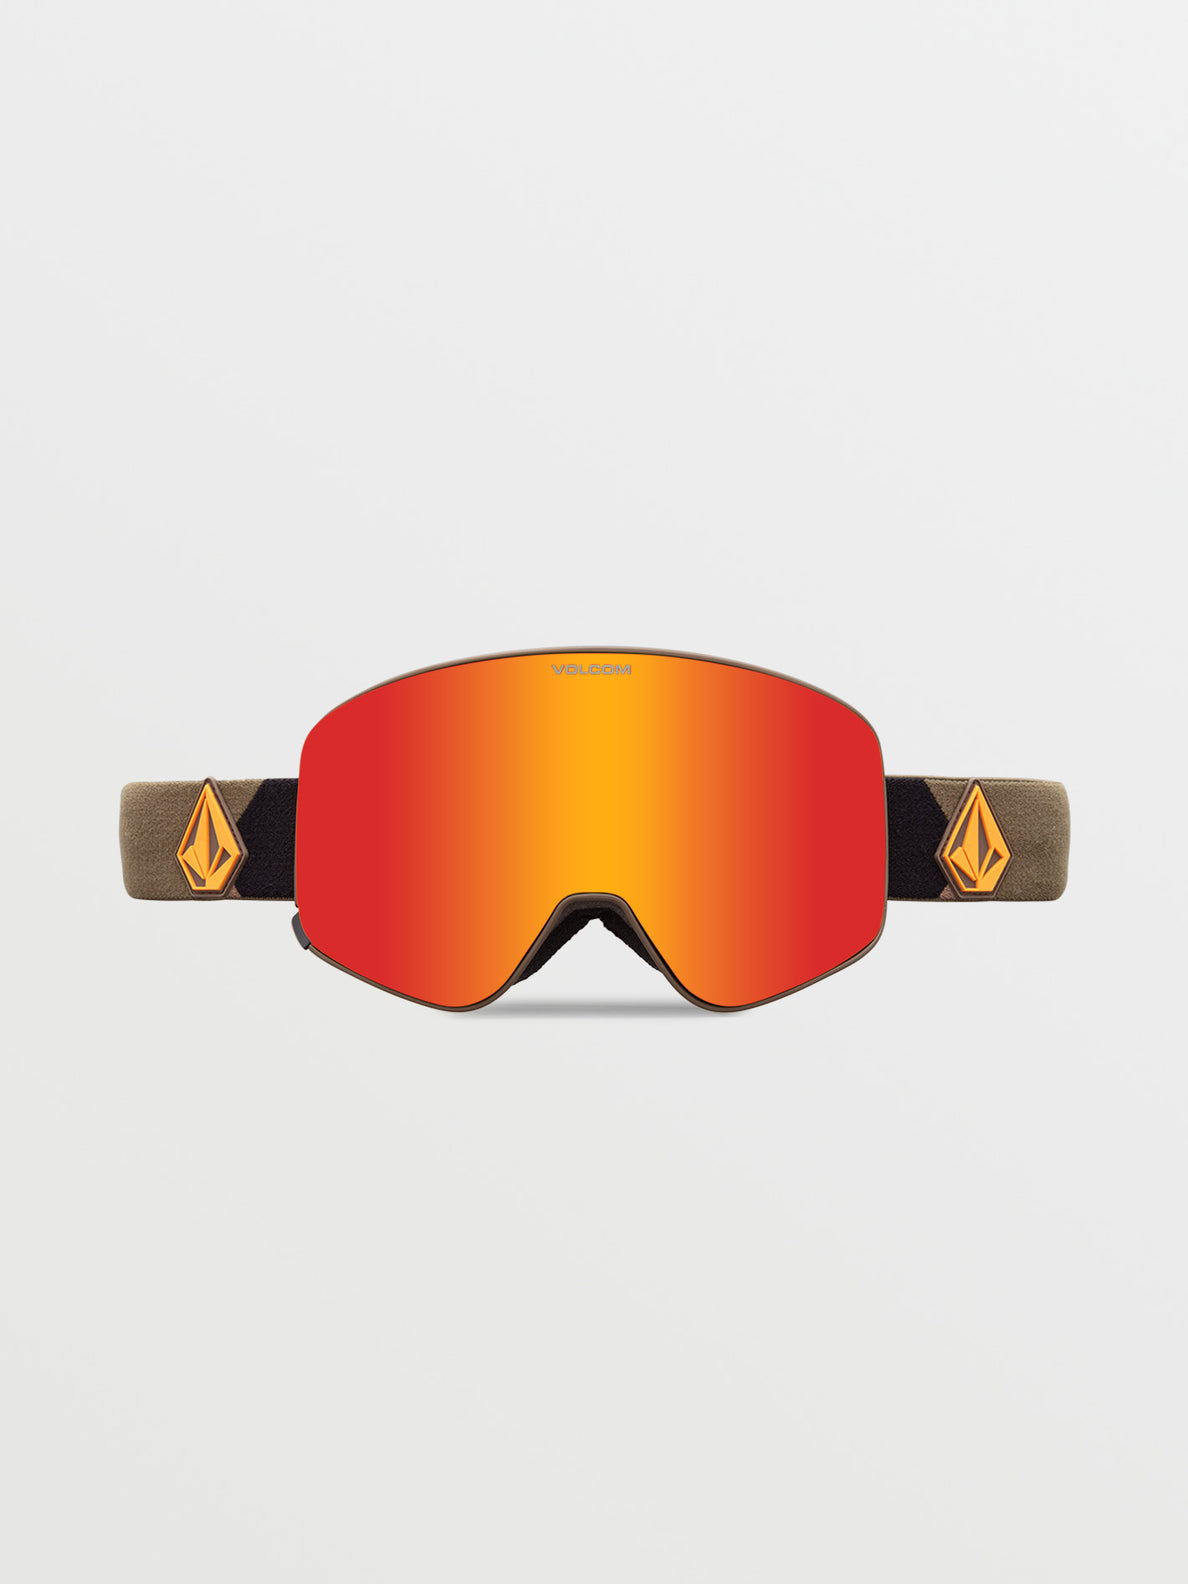 Odyssey Goggle - Military/Gold / Red Chrome+BL / Buckle